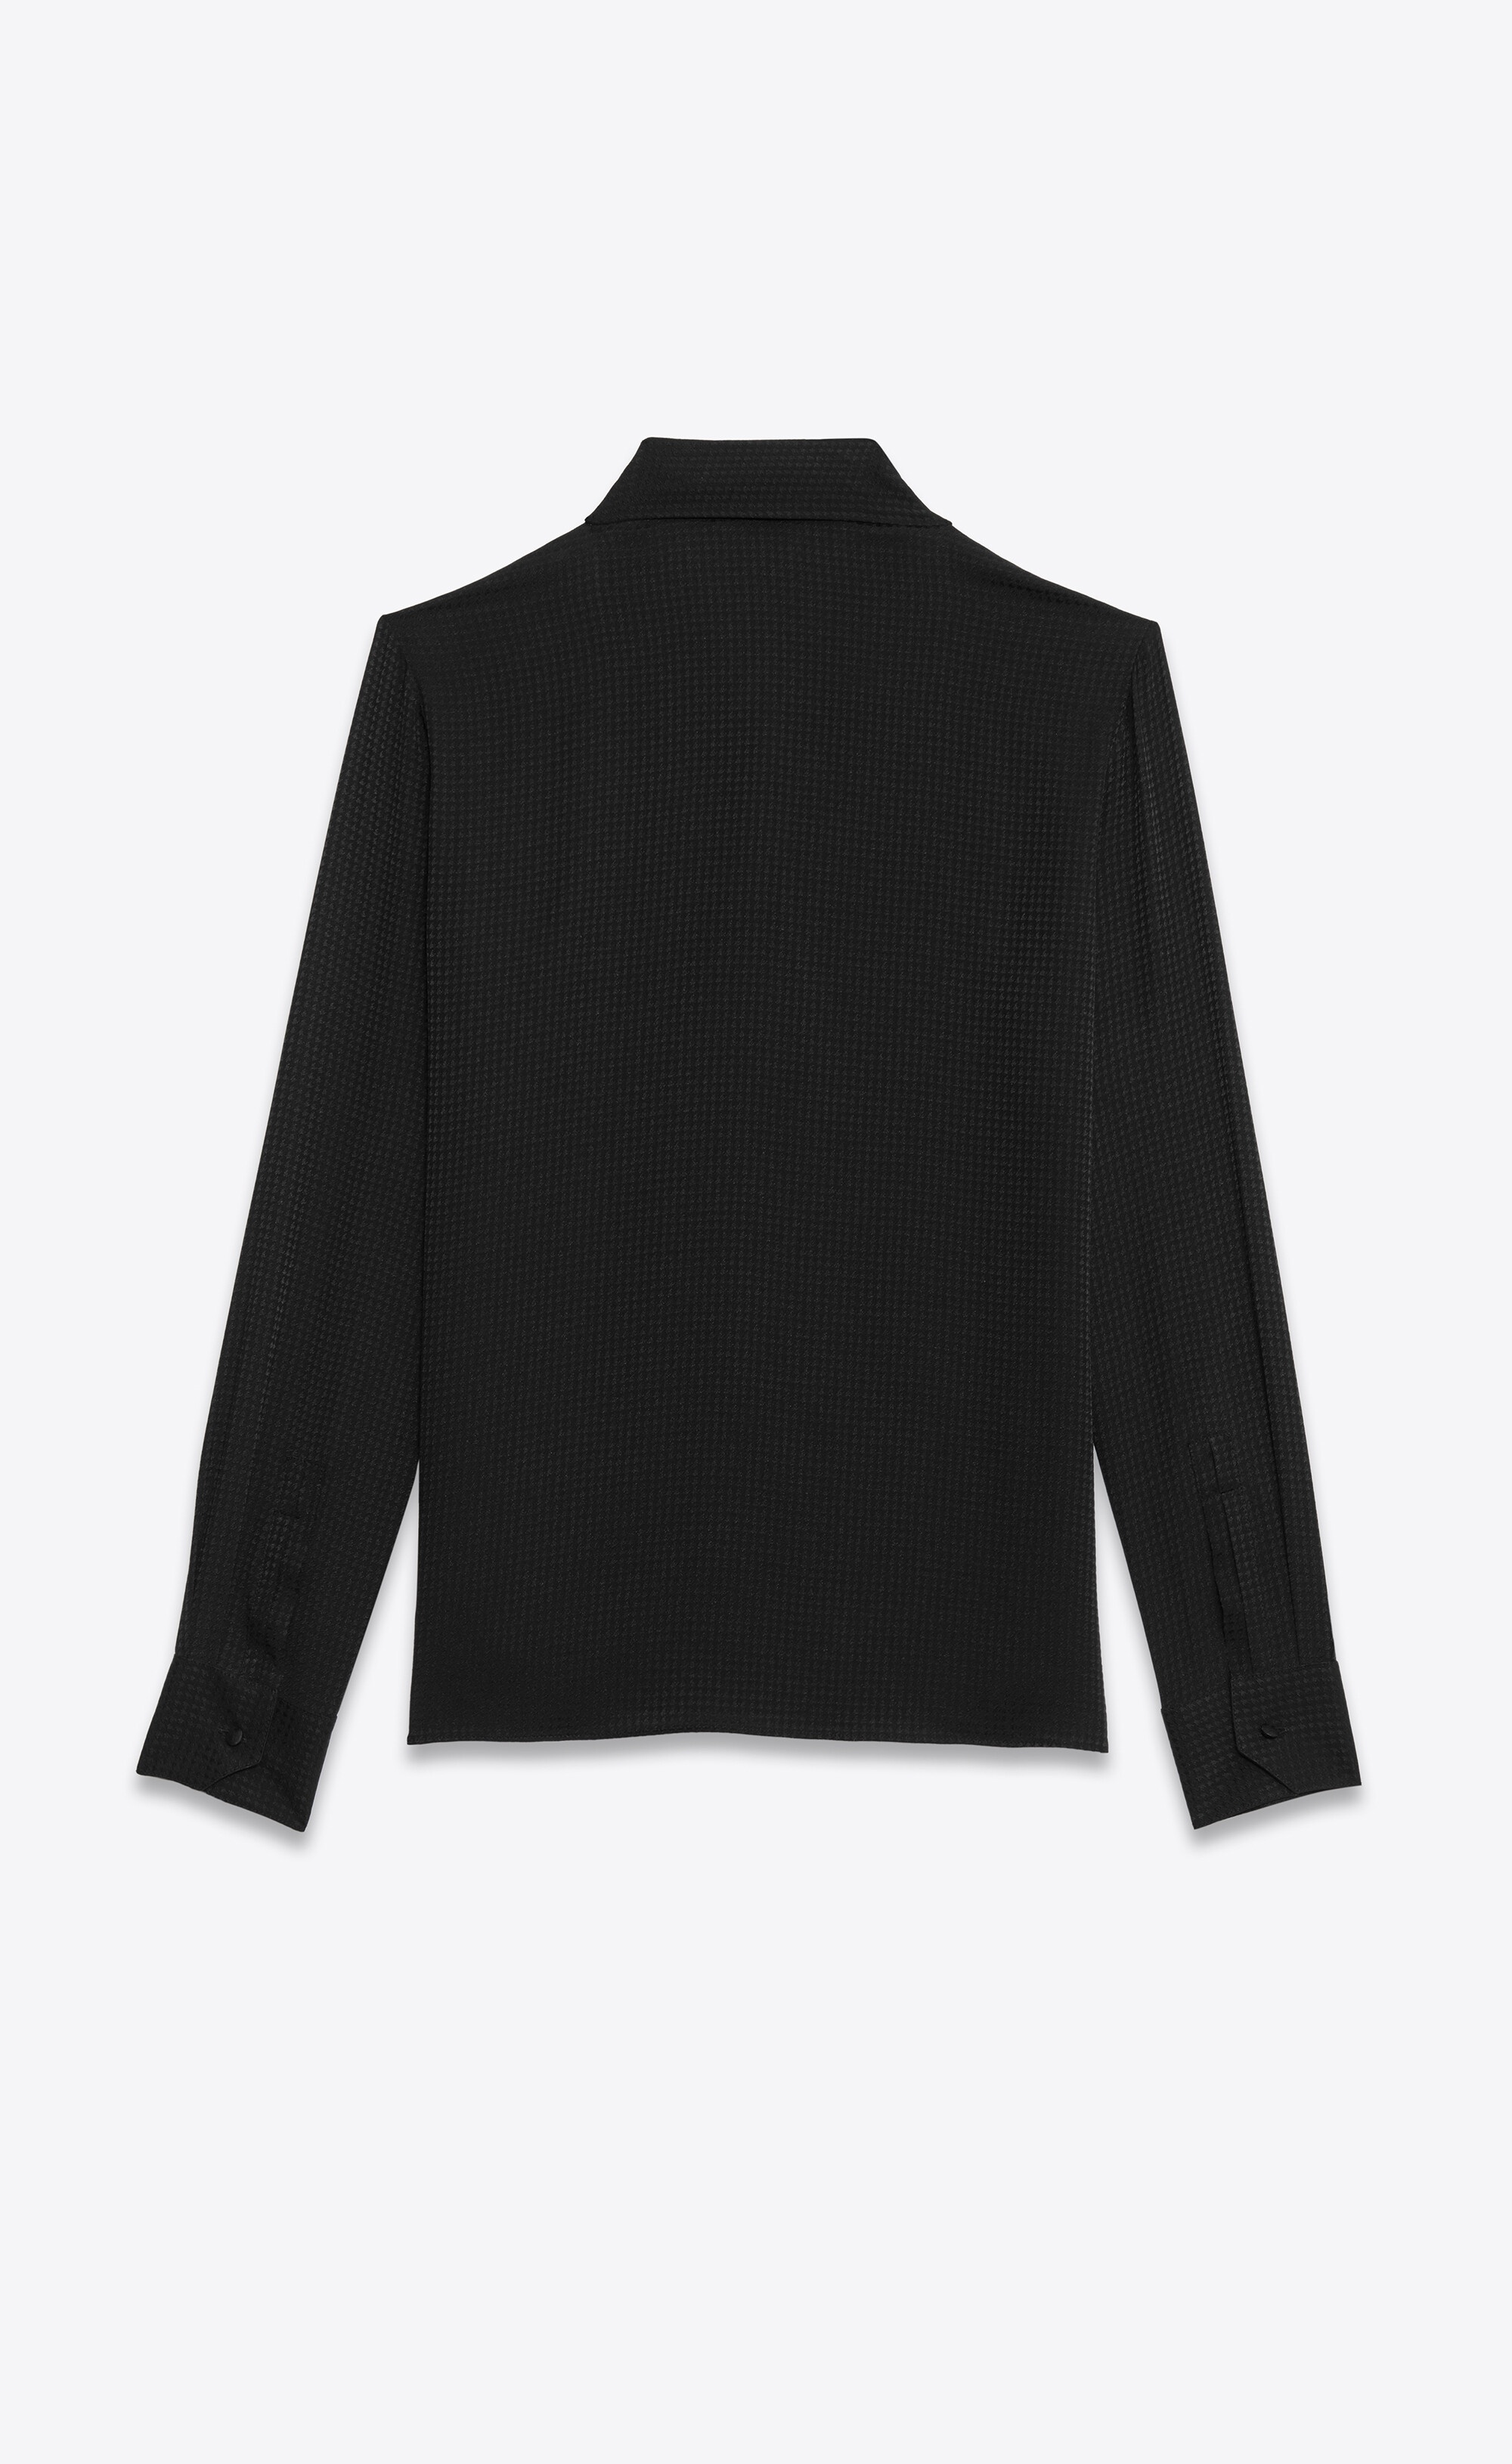 lavallière-neck blouse in shiny and matte puppytooth silk - 4